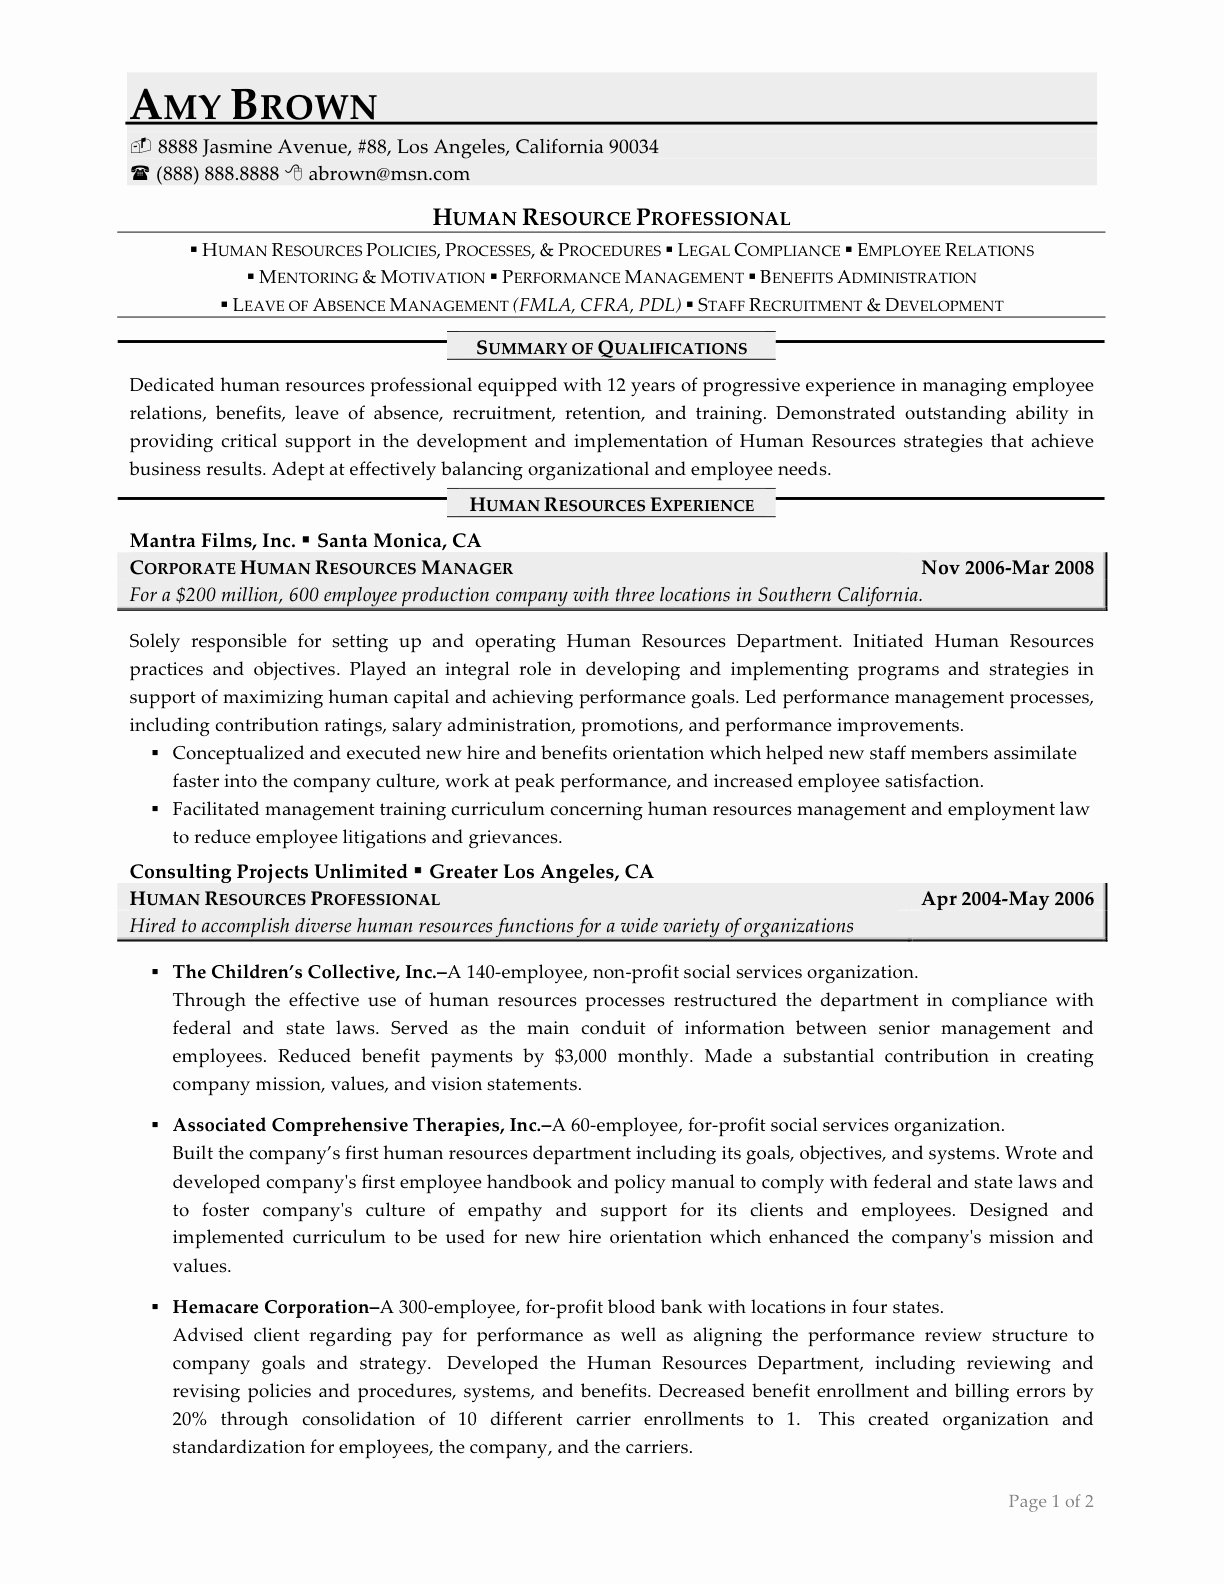 Human Resource Manager Resume Template Lovely Human Resources Resume Examples Resume Professional Writers